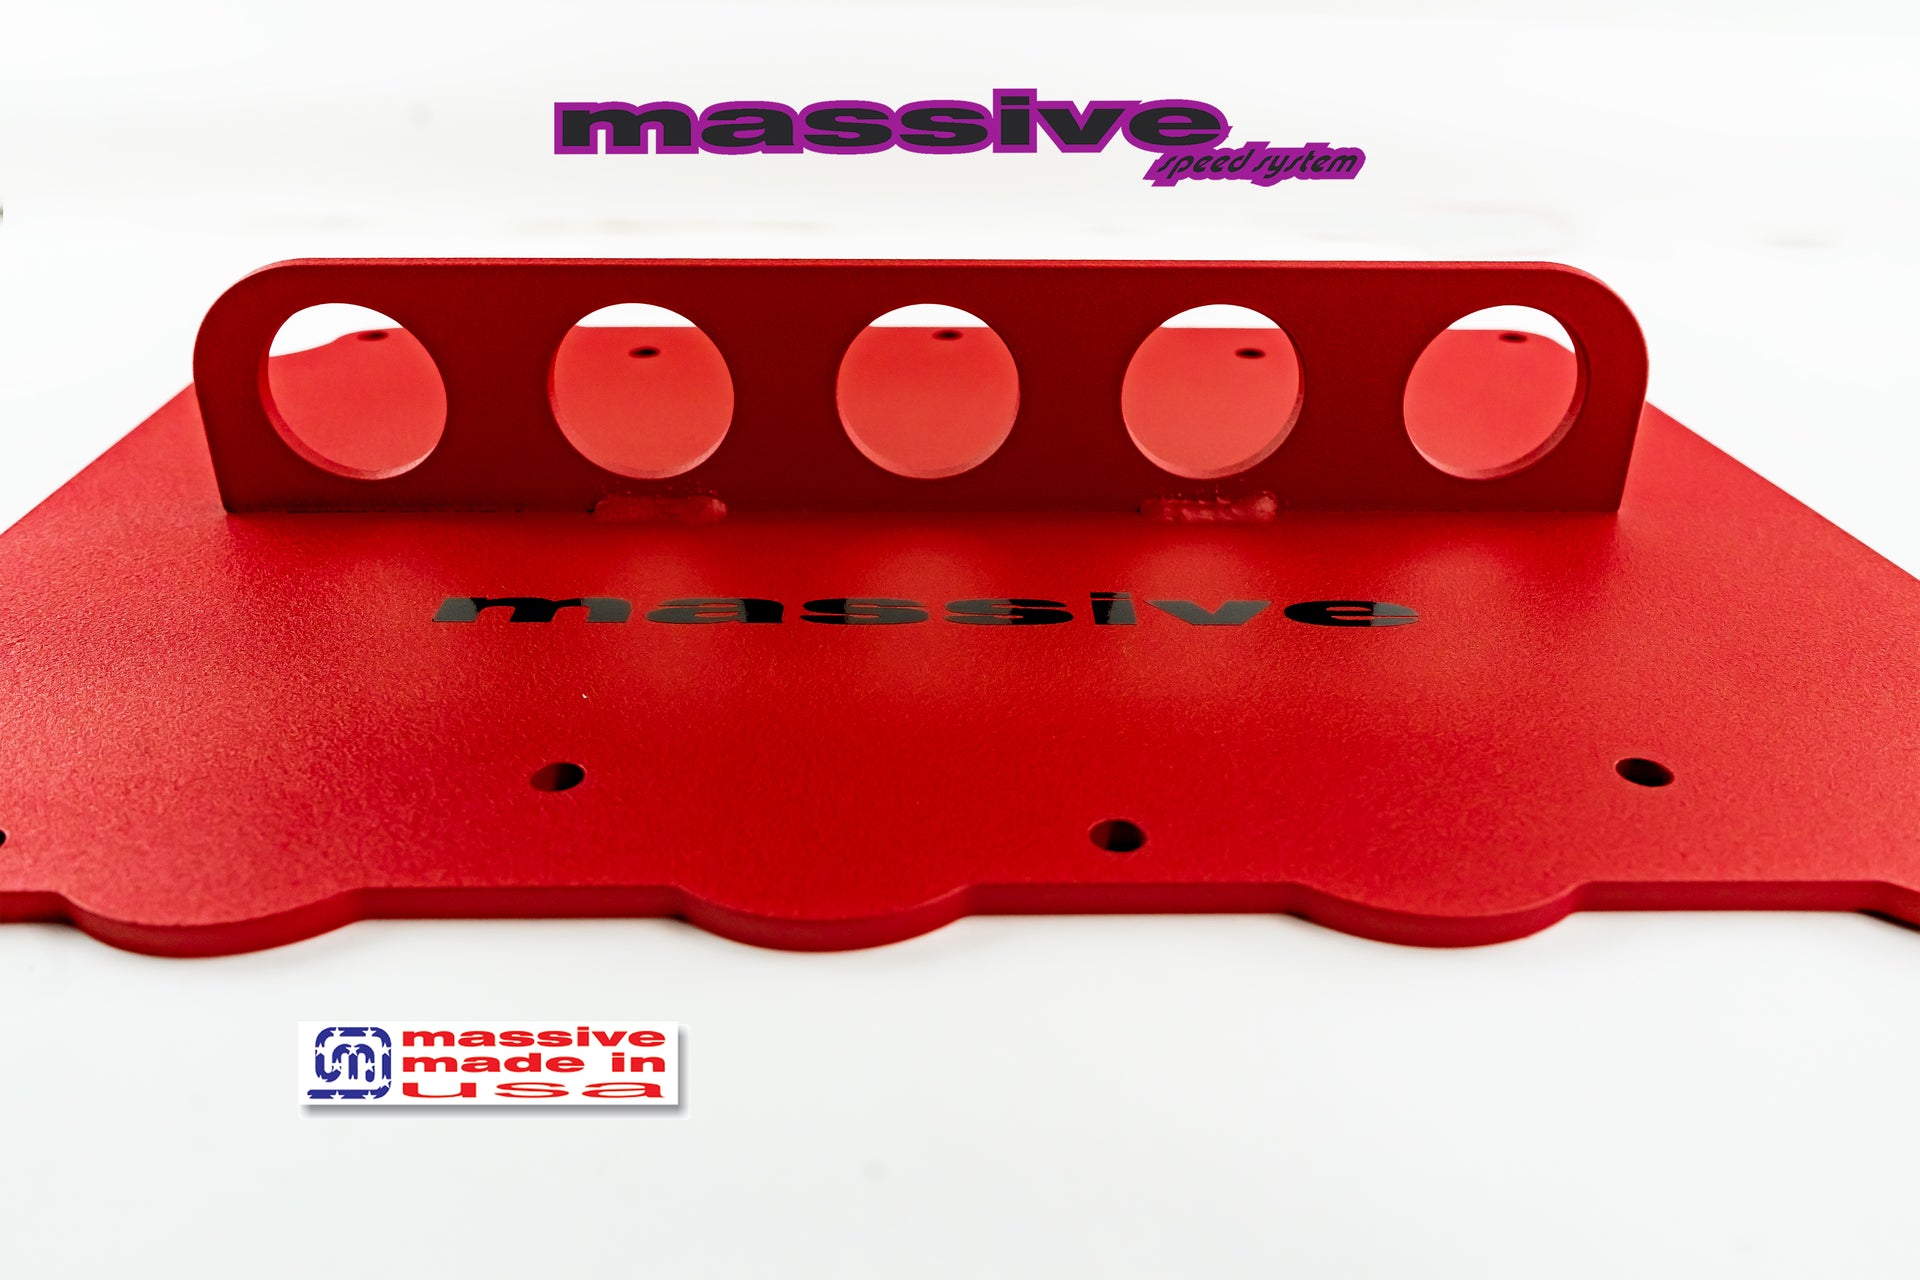 Massive Speed System Coyote Engine 5.0 Lift plate - Massive Speed System